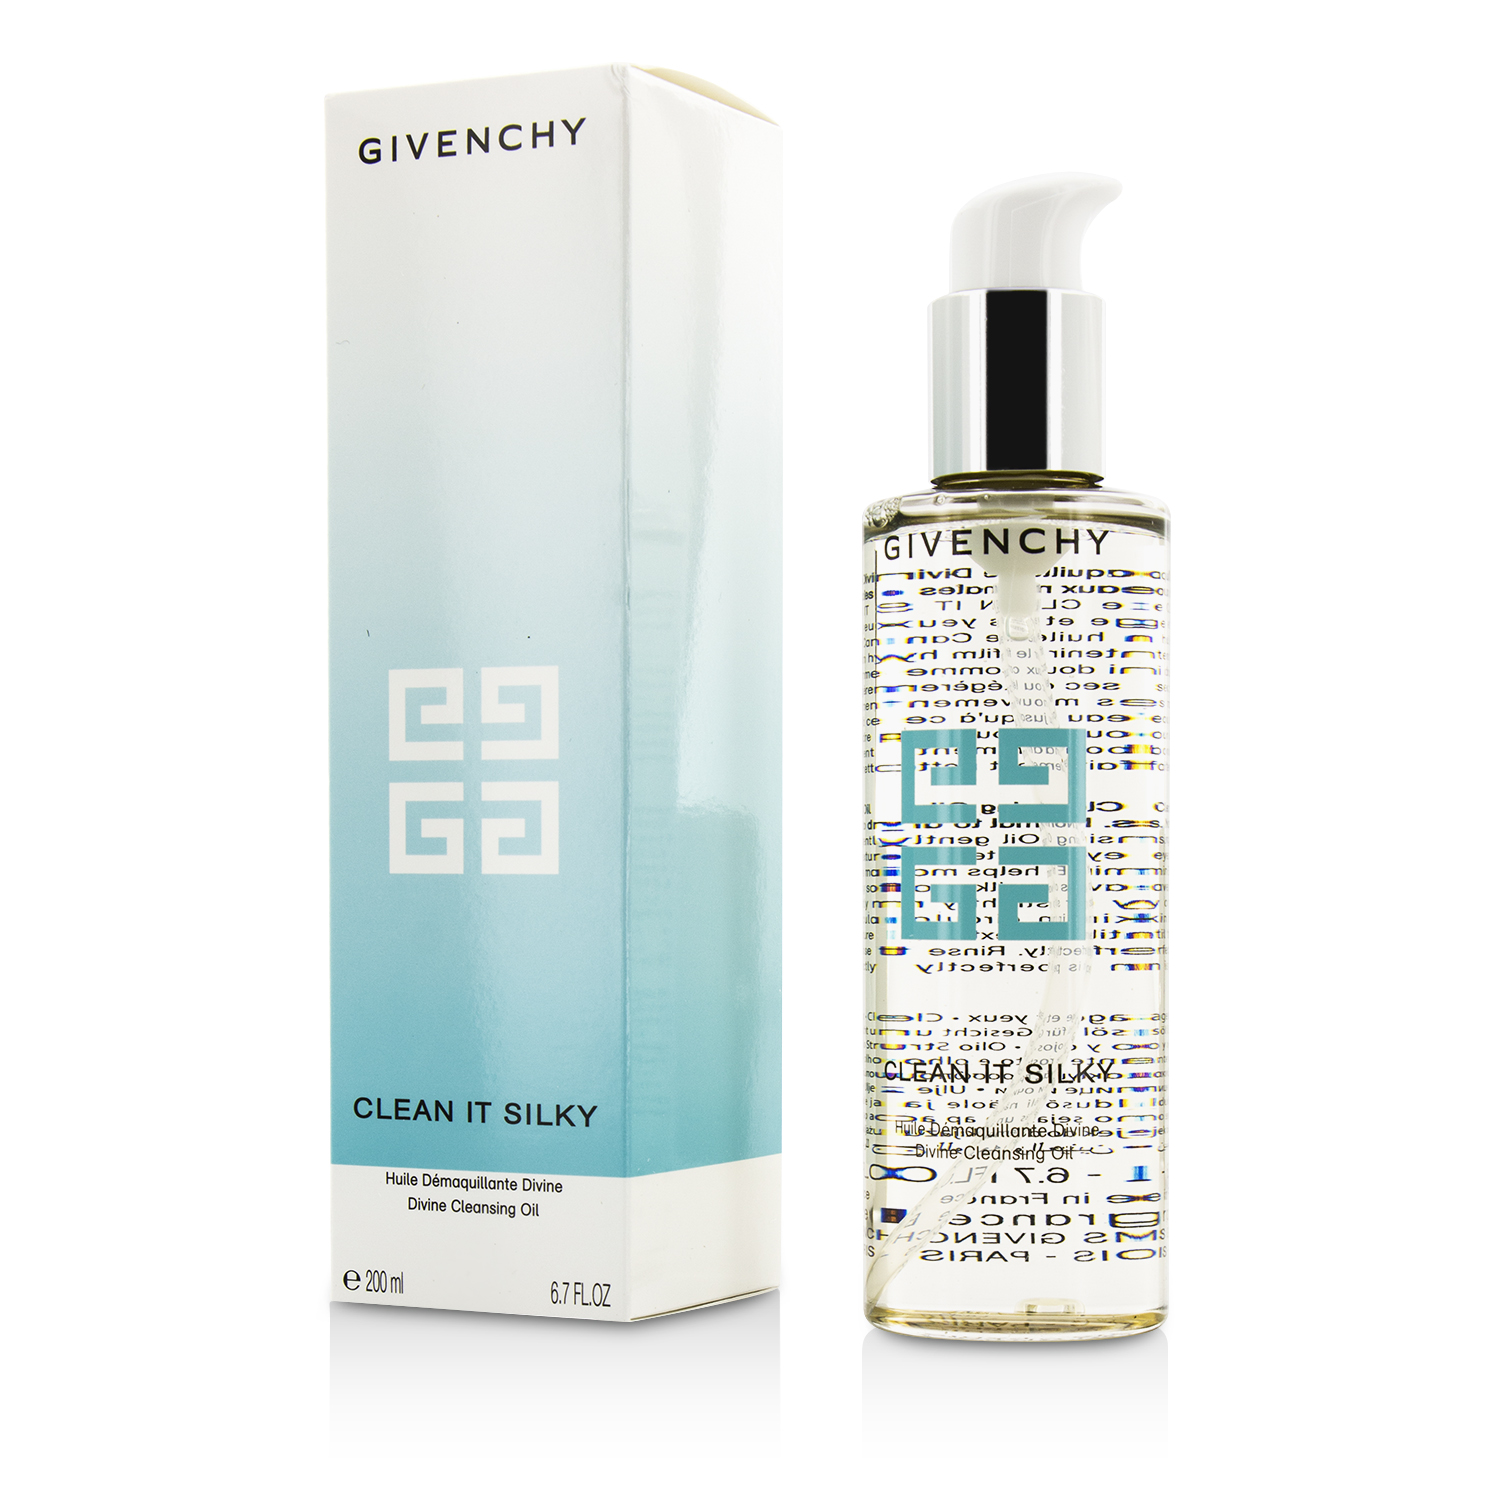 Clean It Silky Divine Cleansing Oil Givenchy Image